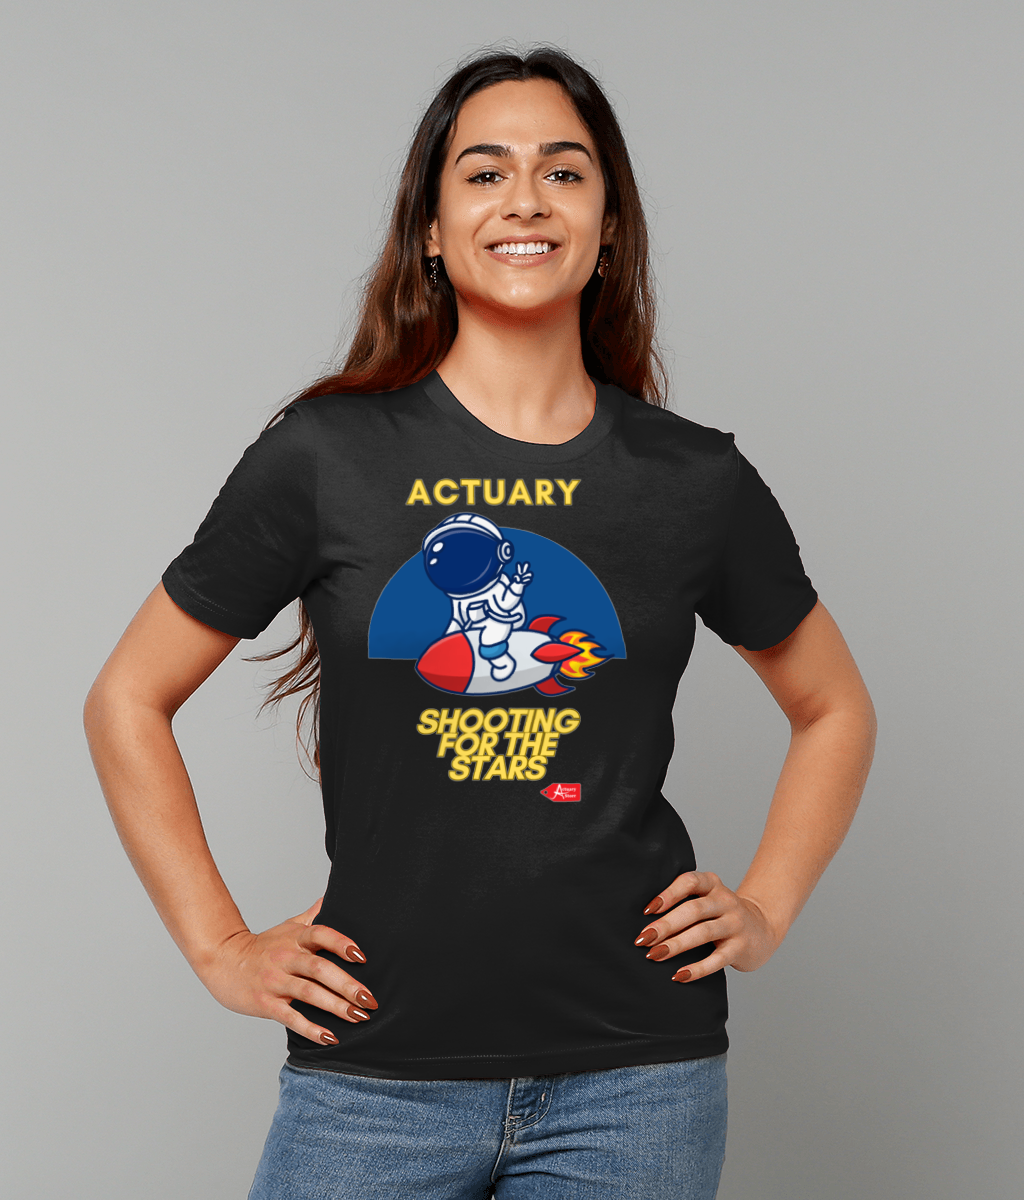 Actuary Shooting For The Stars Astronaut T-Shirt (Black and White Variants)